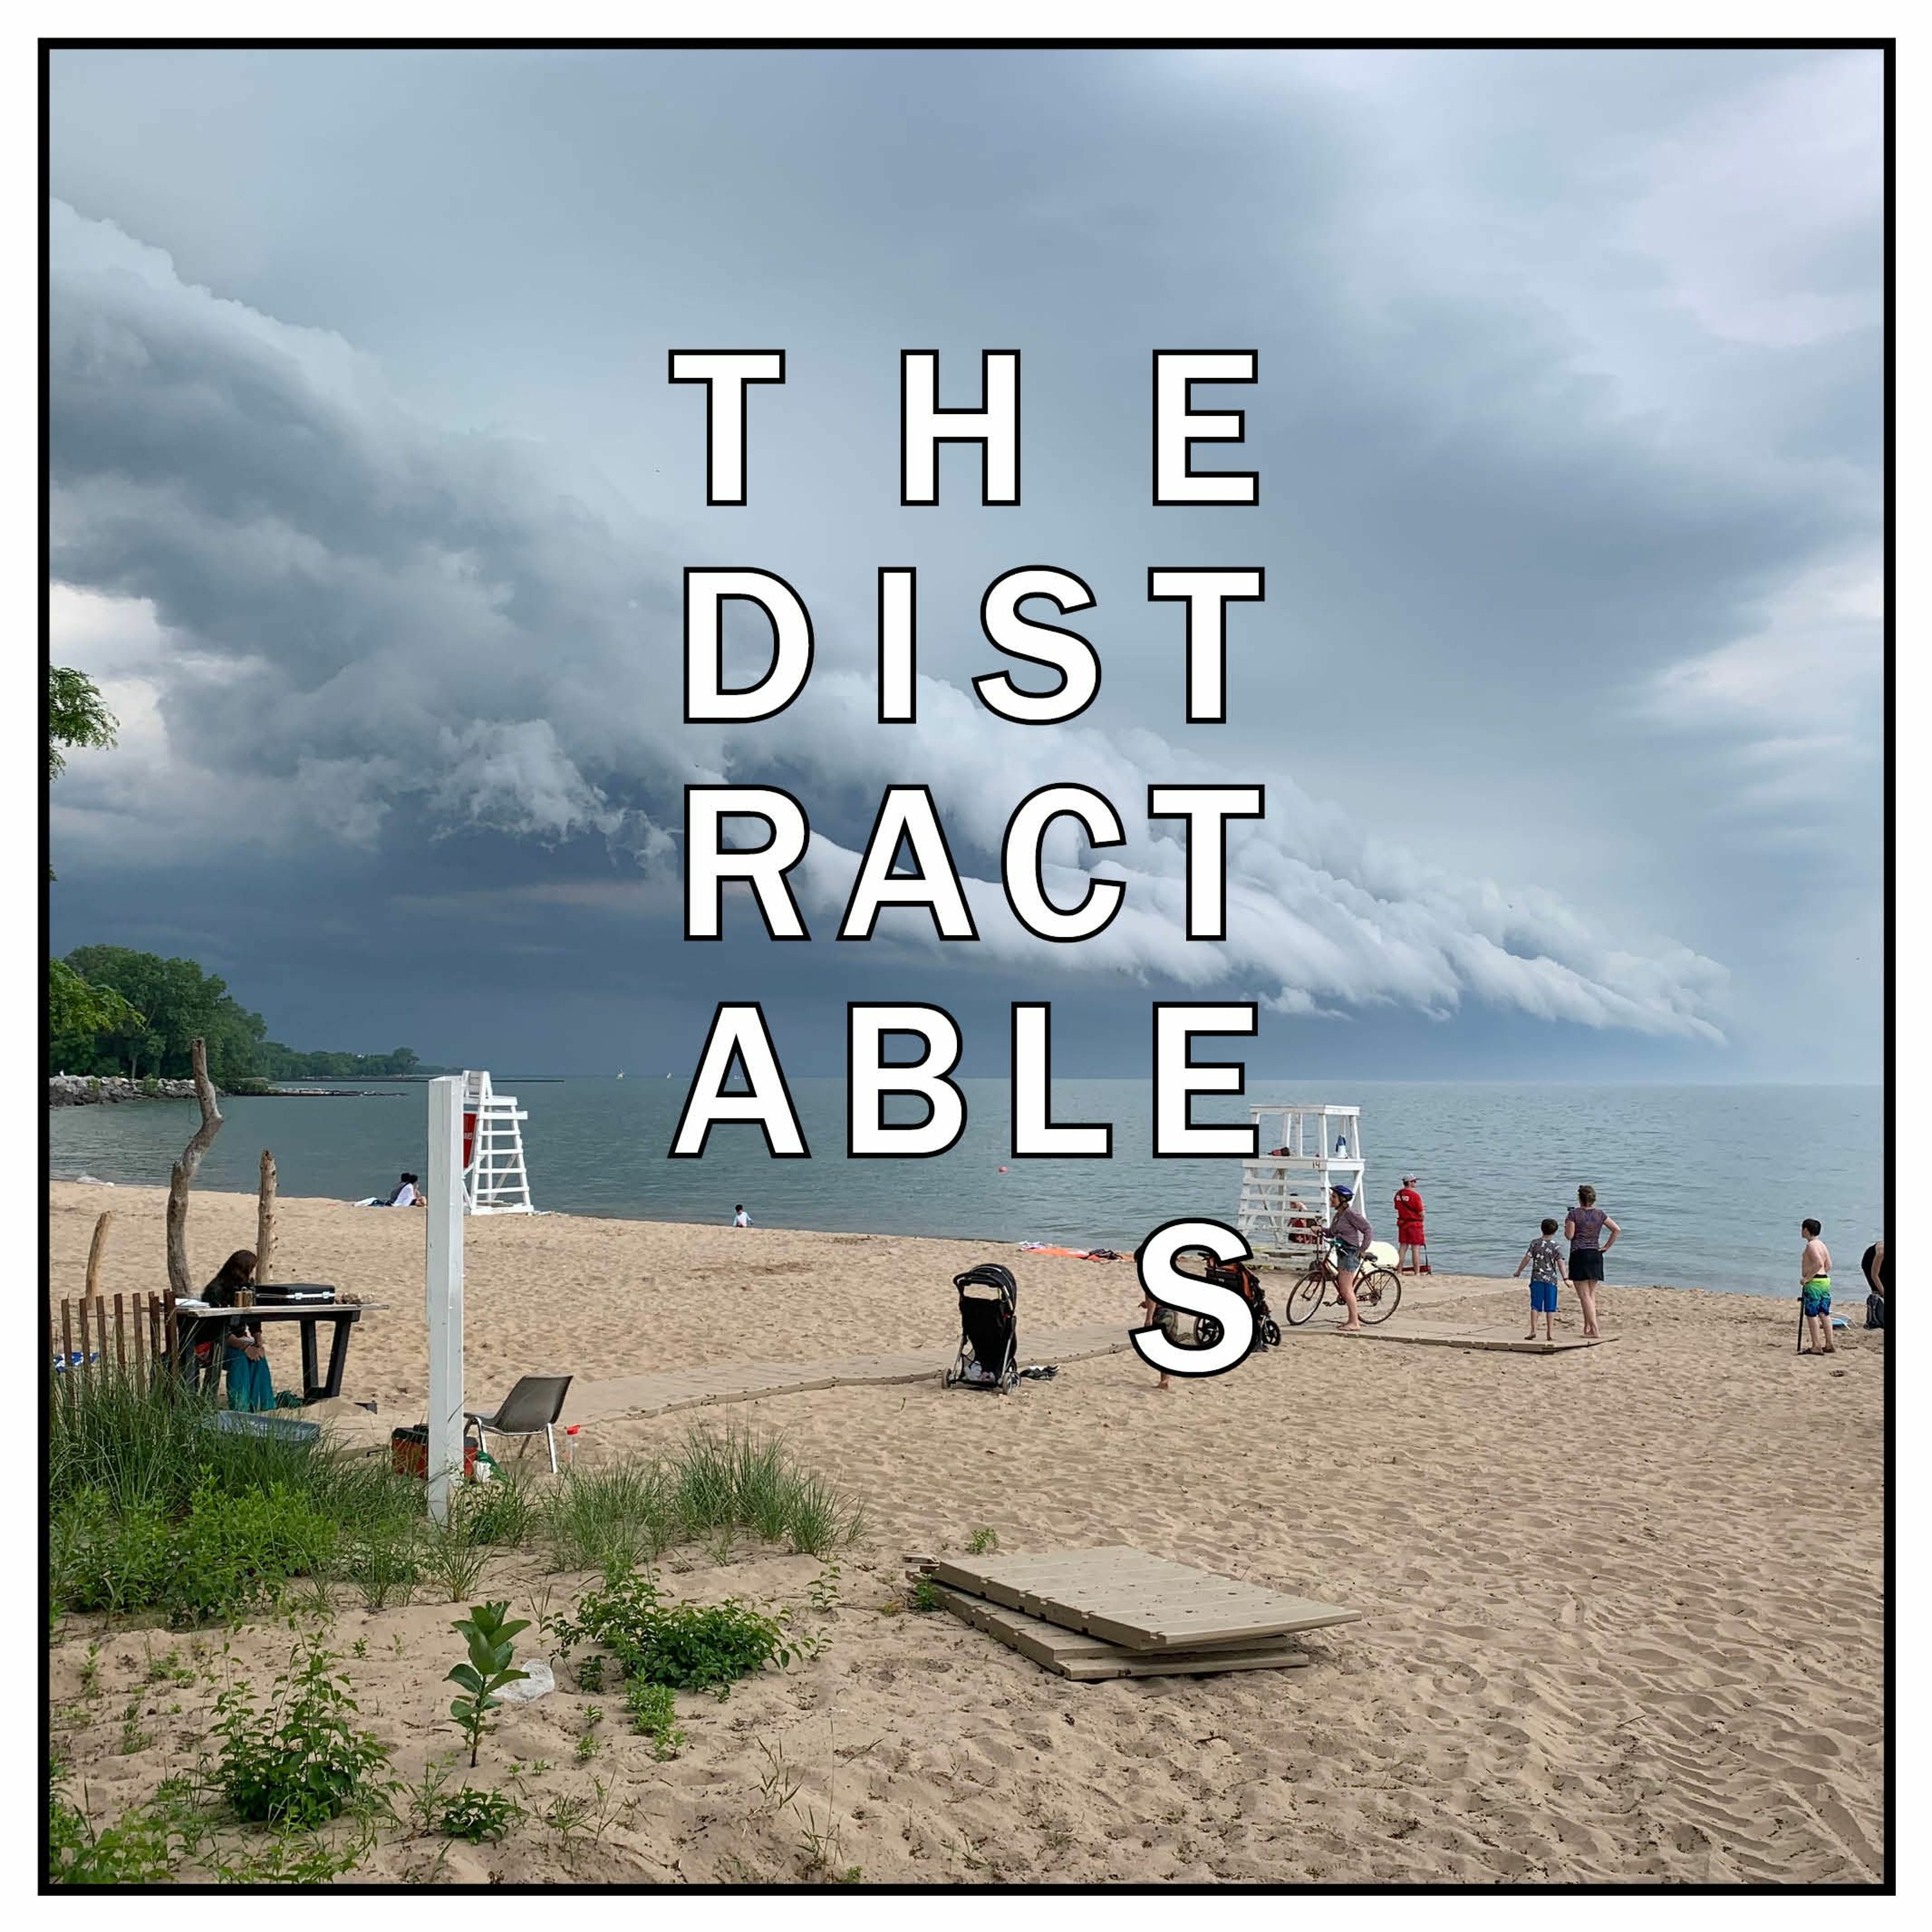 Distractables 1 - 6: ”The Illusion of a Coterie”